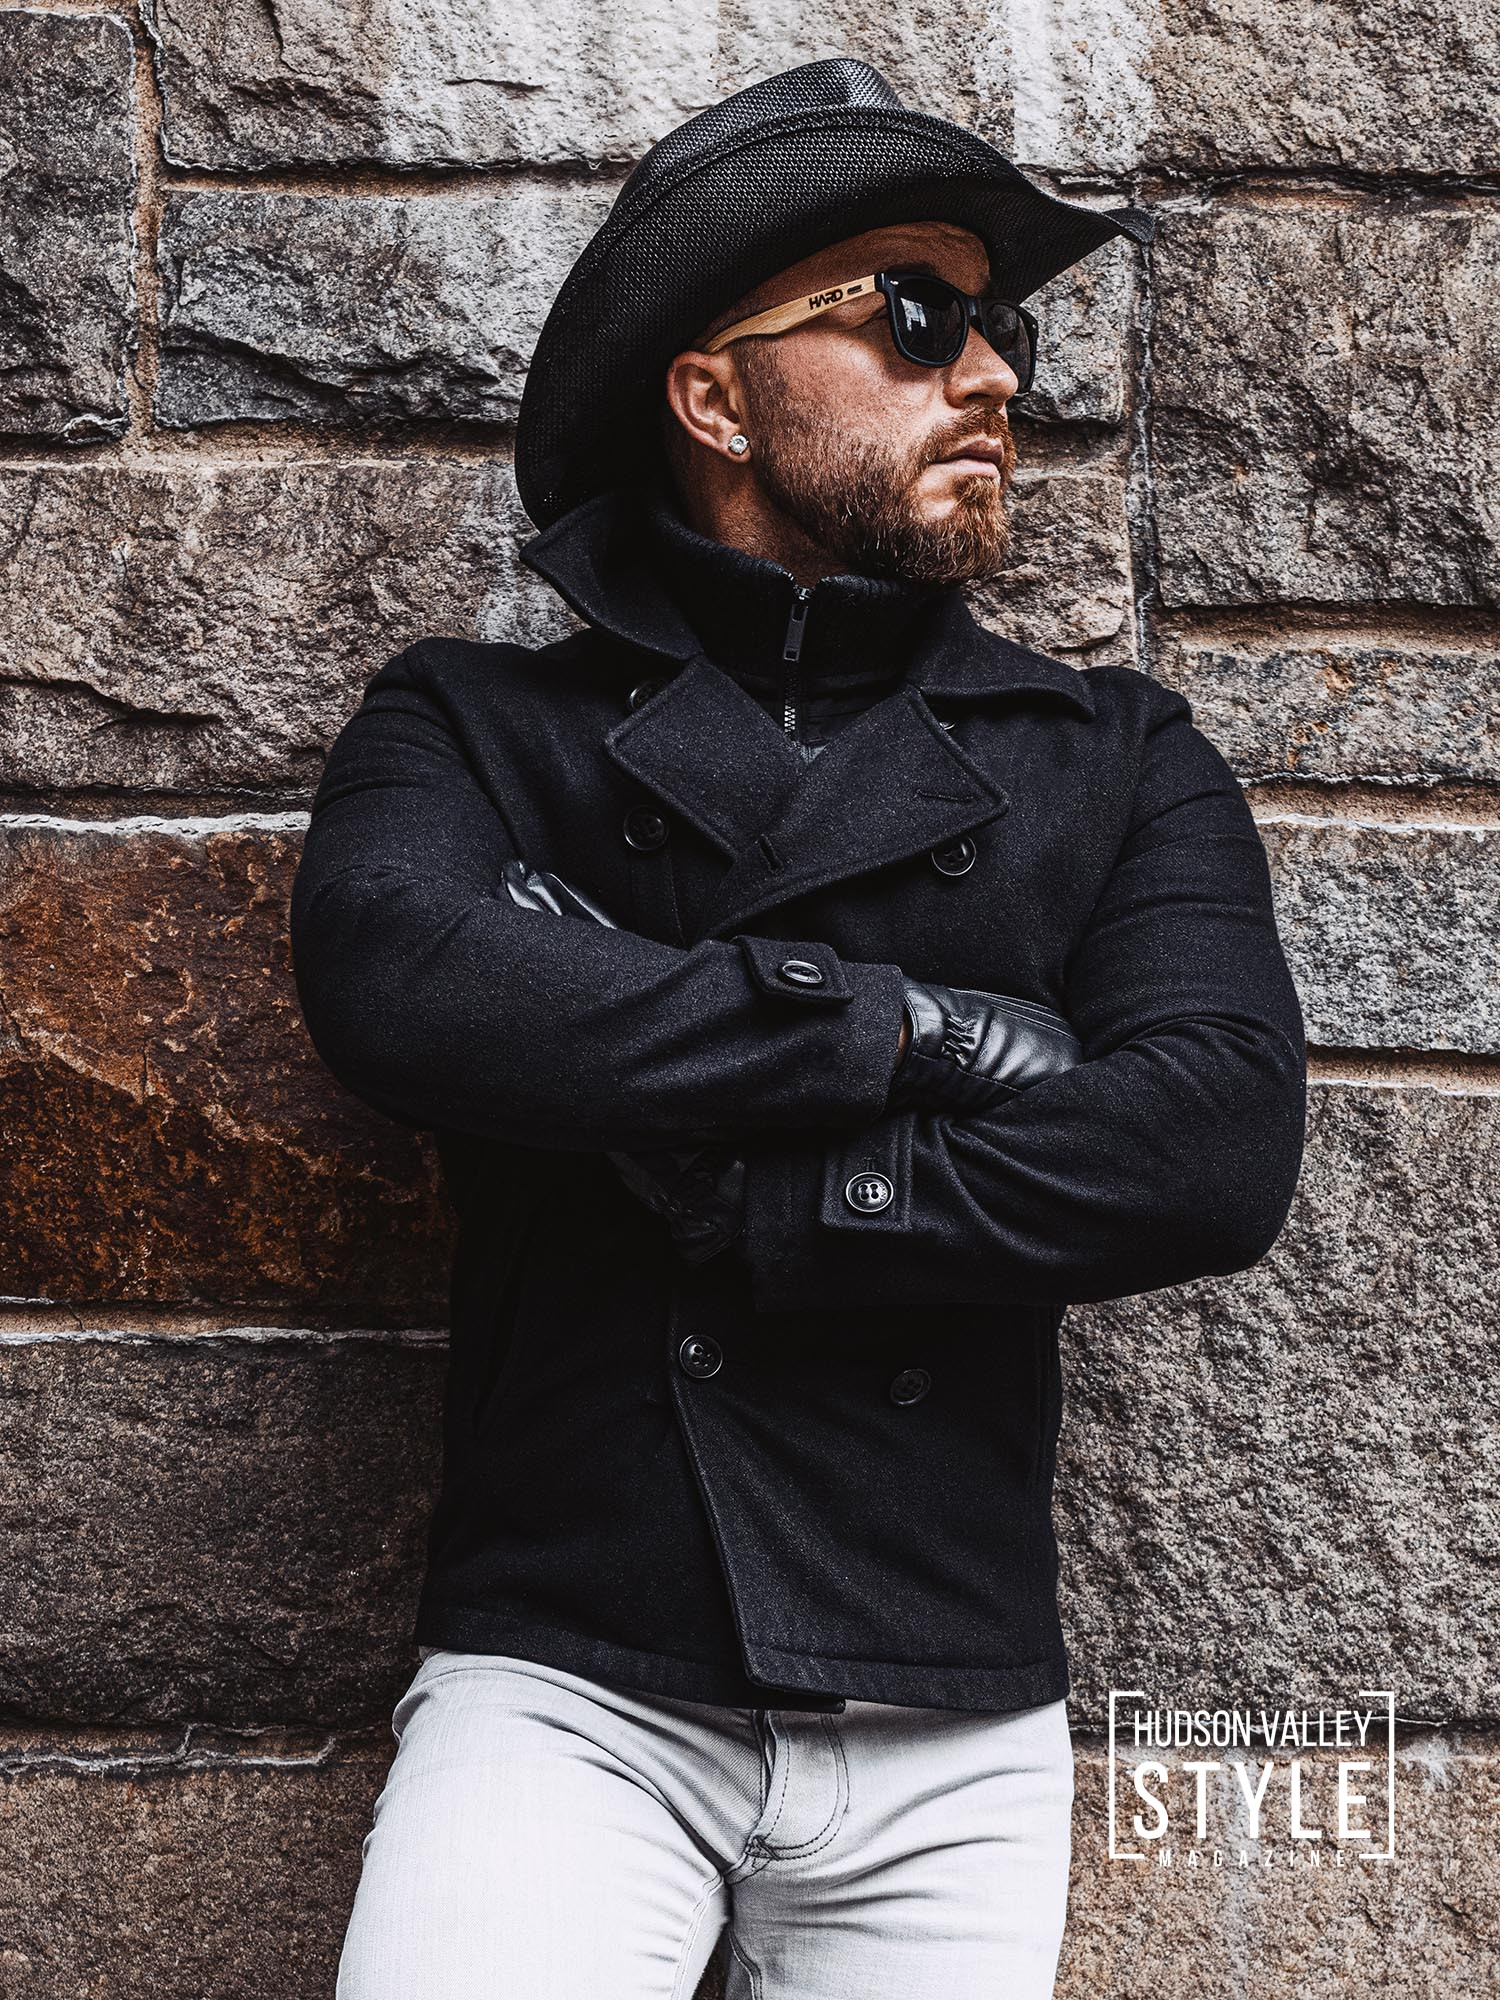 Saddle Up in Style: Mastering the Urban Cowboy Look with Men's Fashion Tips from Maxwell Alexander – Presented by HARD NEW YORK – Fashion Accessories and Apparel for Men